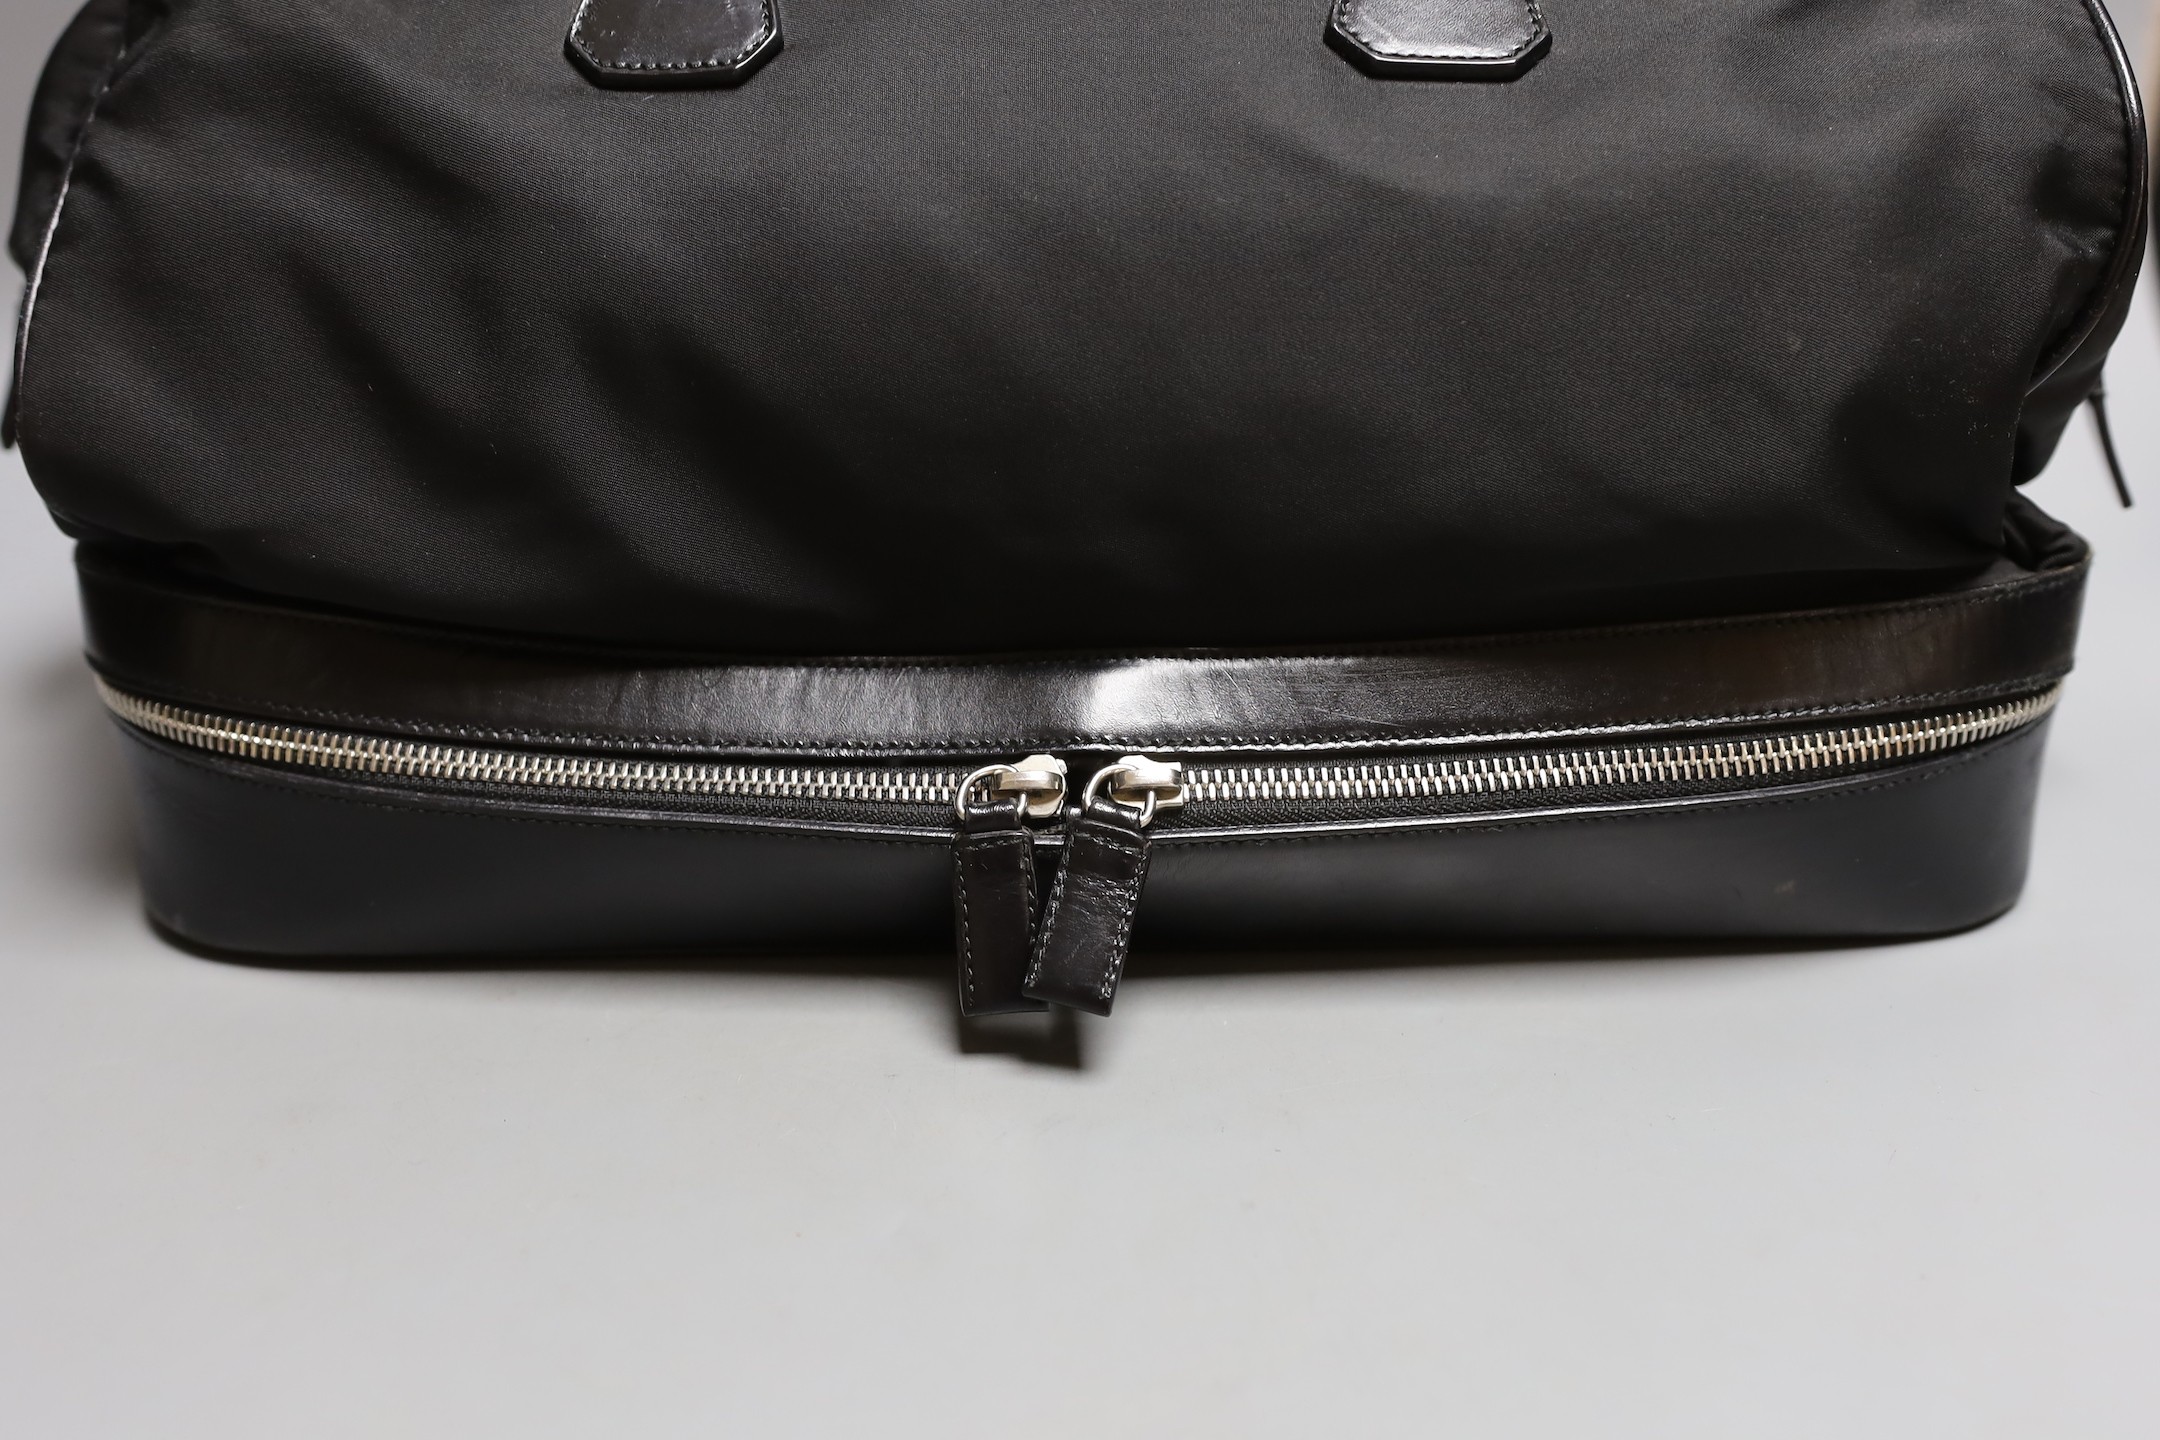 A Prada bowling bag style with zip up compartment